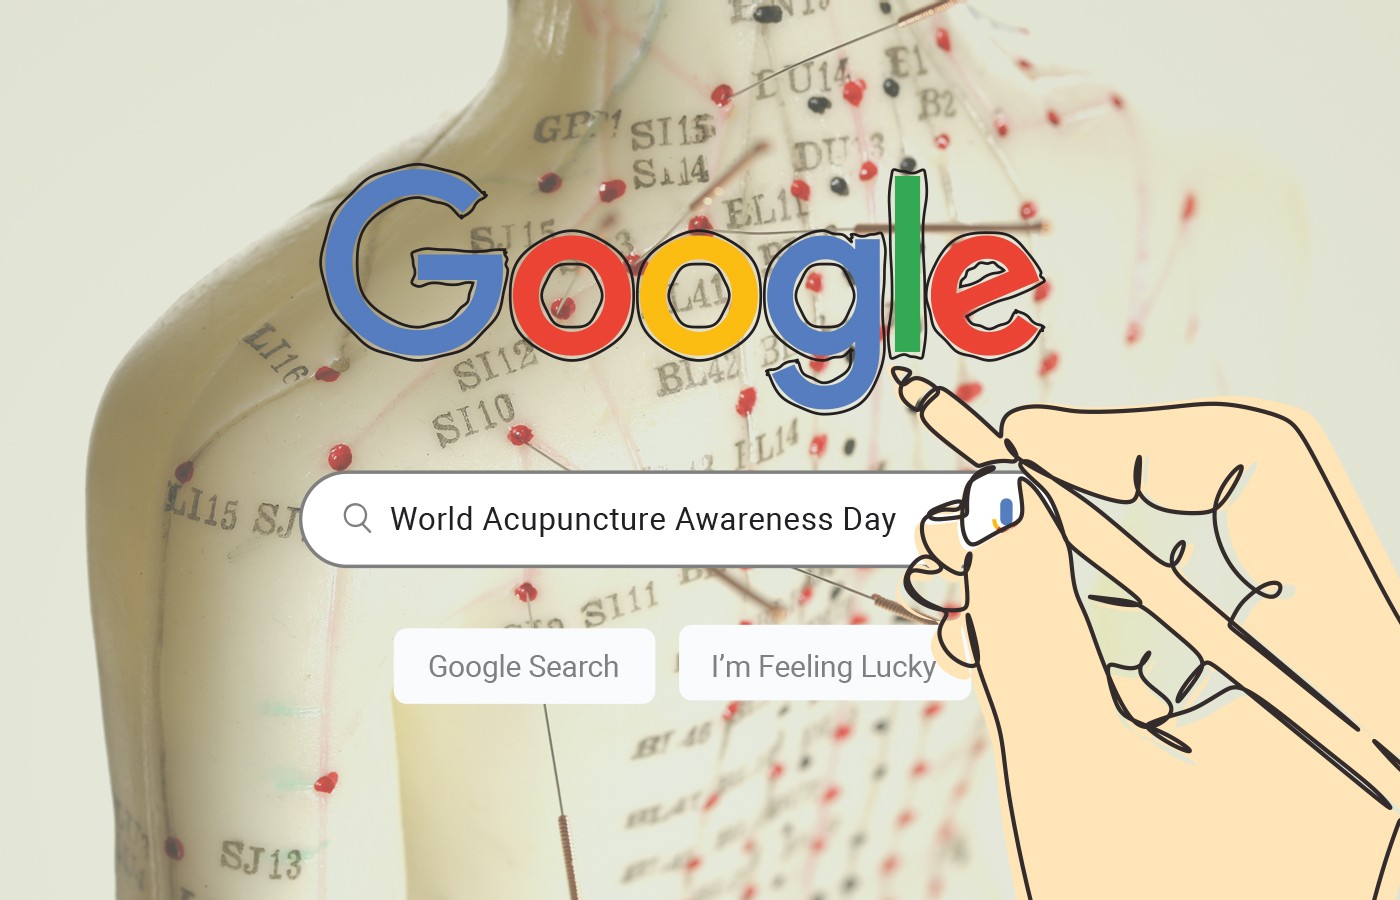 An Acupuncture-Themed “Google Doodle”?